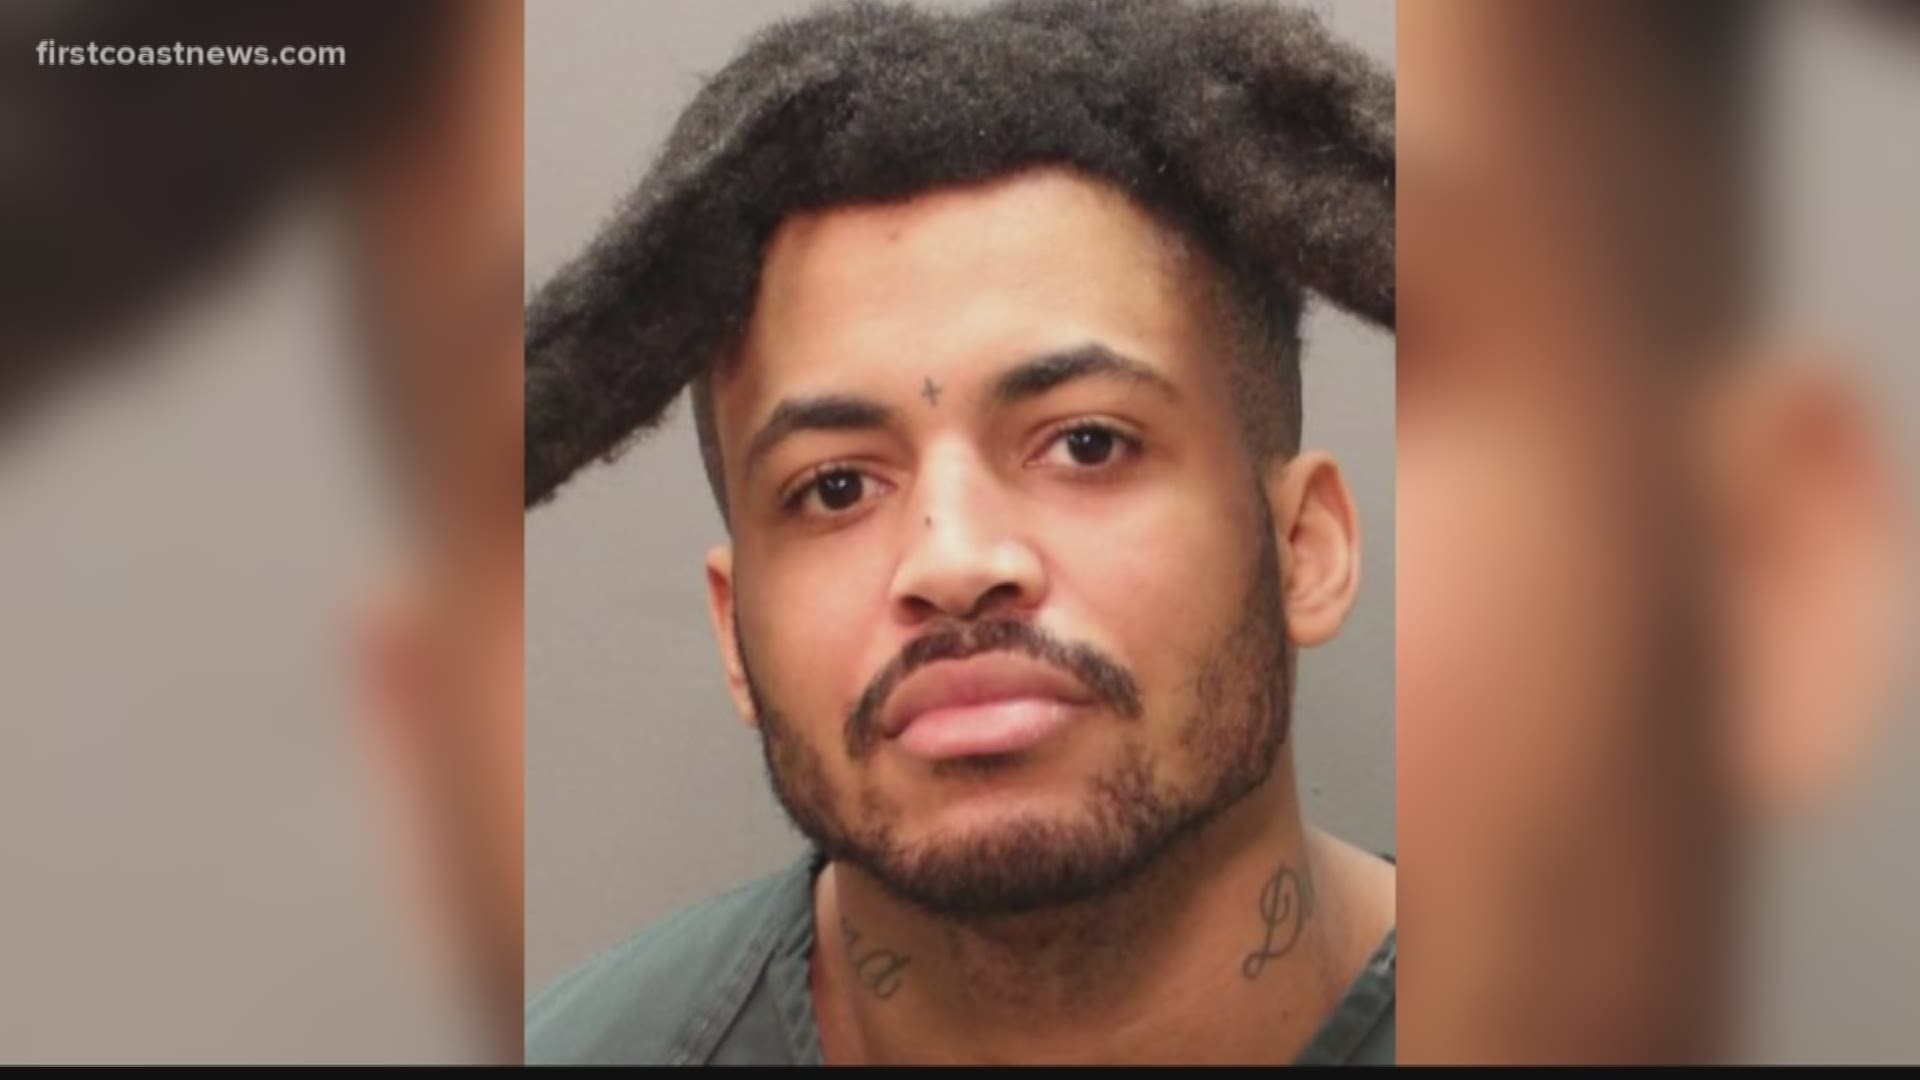 Donjuan Powell Jr., 26, was charged with two counts of second-degree murder. Police say the investigation is still ongoing, and more suspects may be involved.